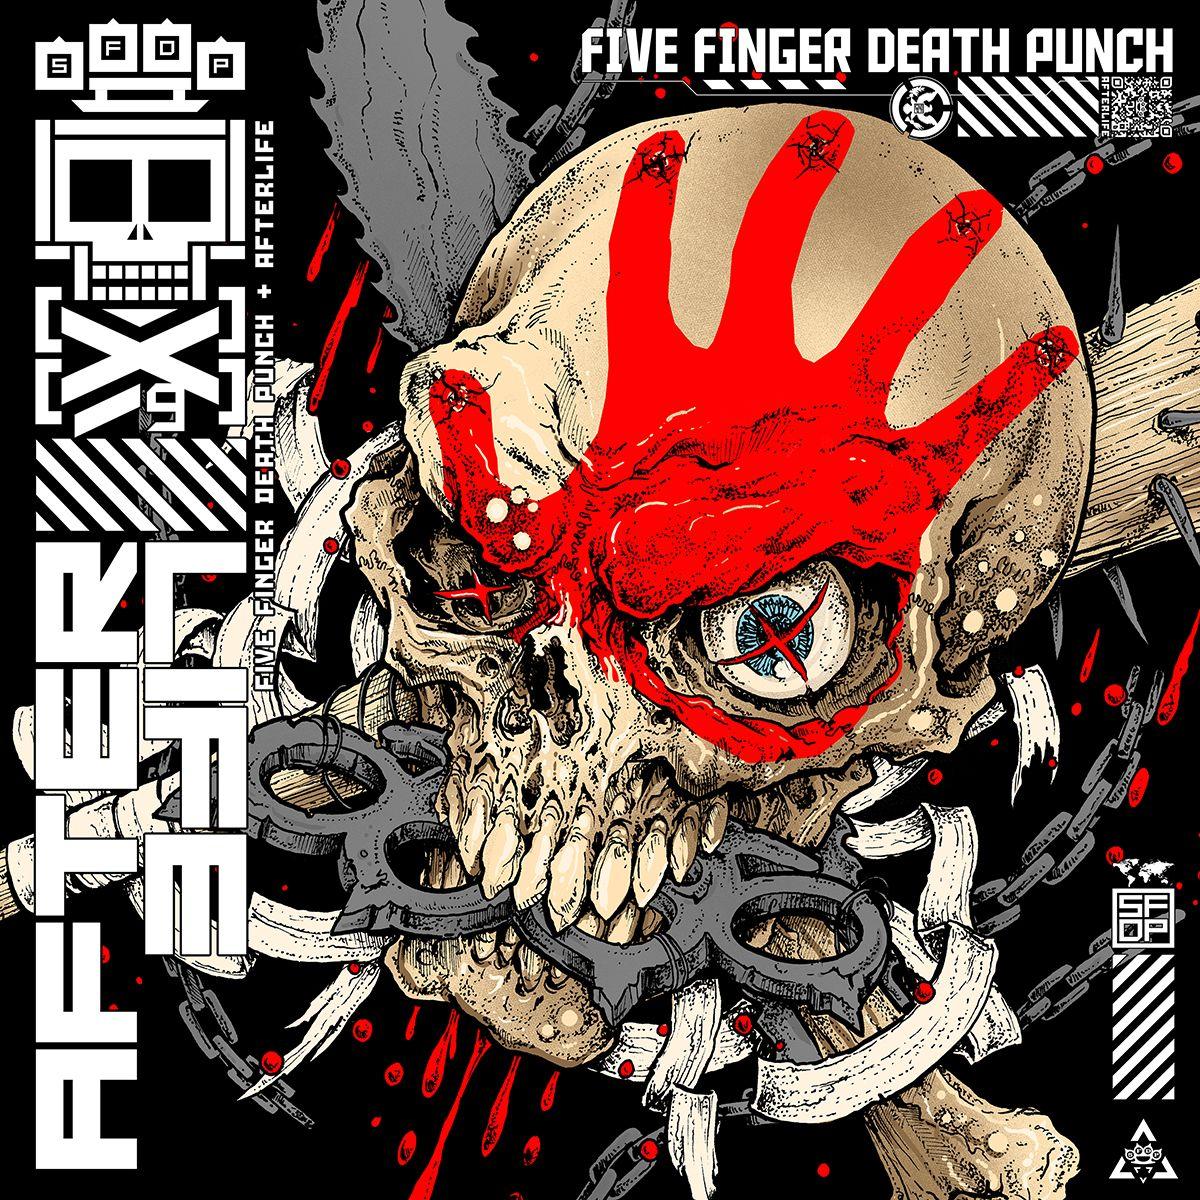 Five Finger Death Punch Announce New Album Afterlife and Premiere New Track “IOU”